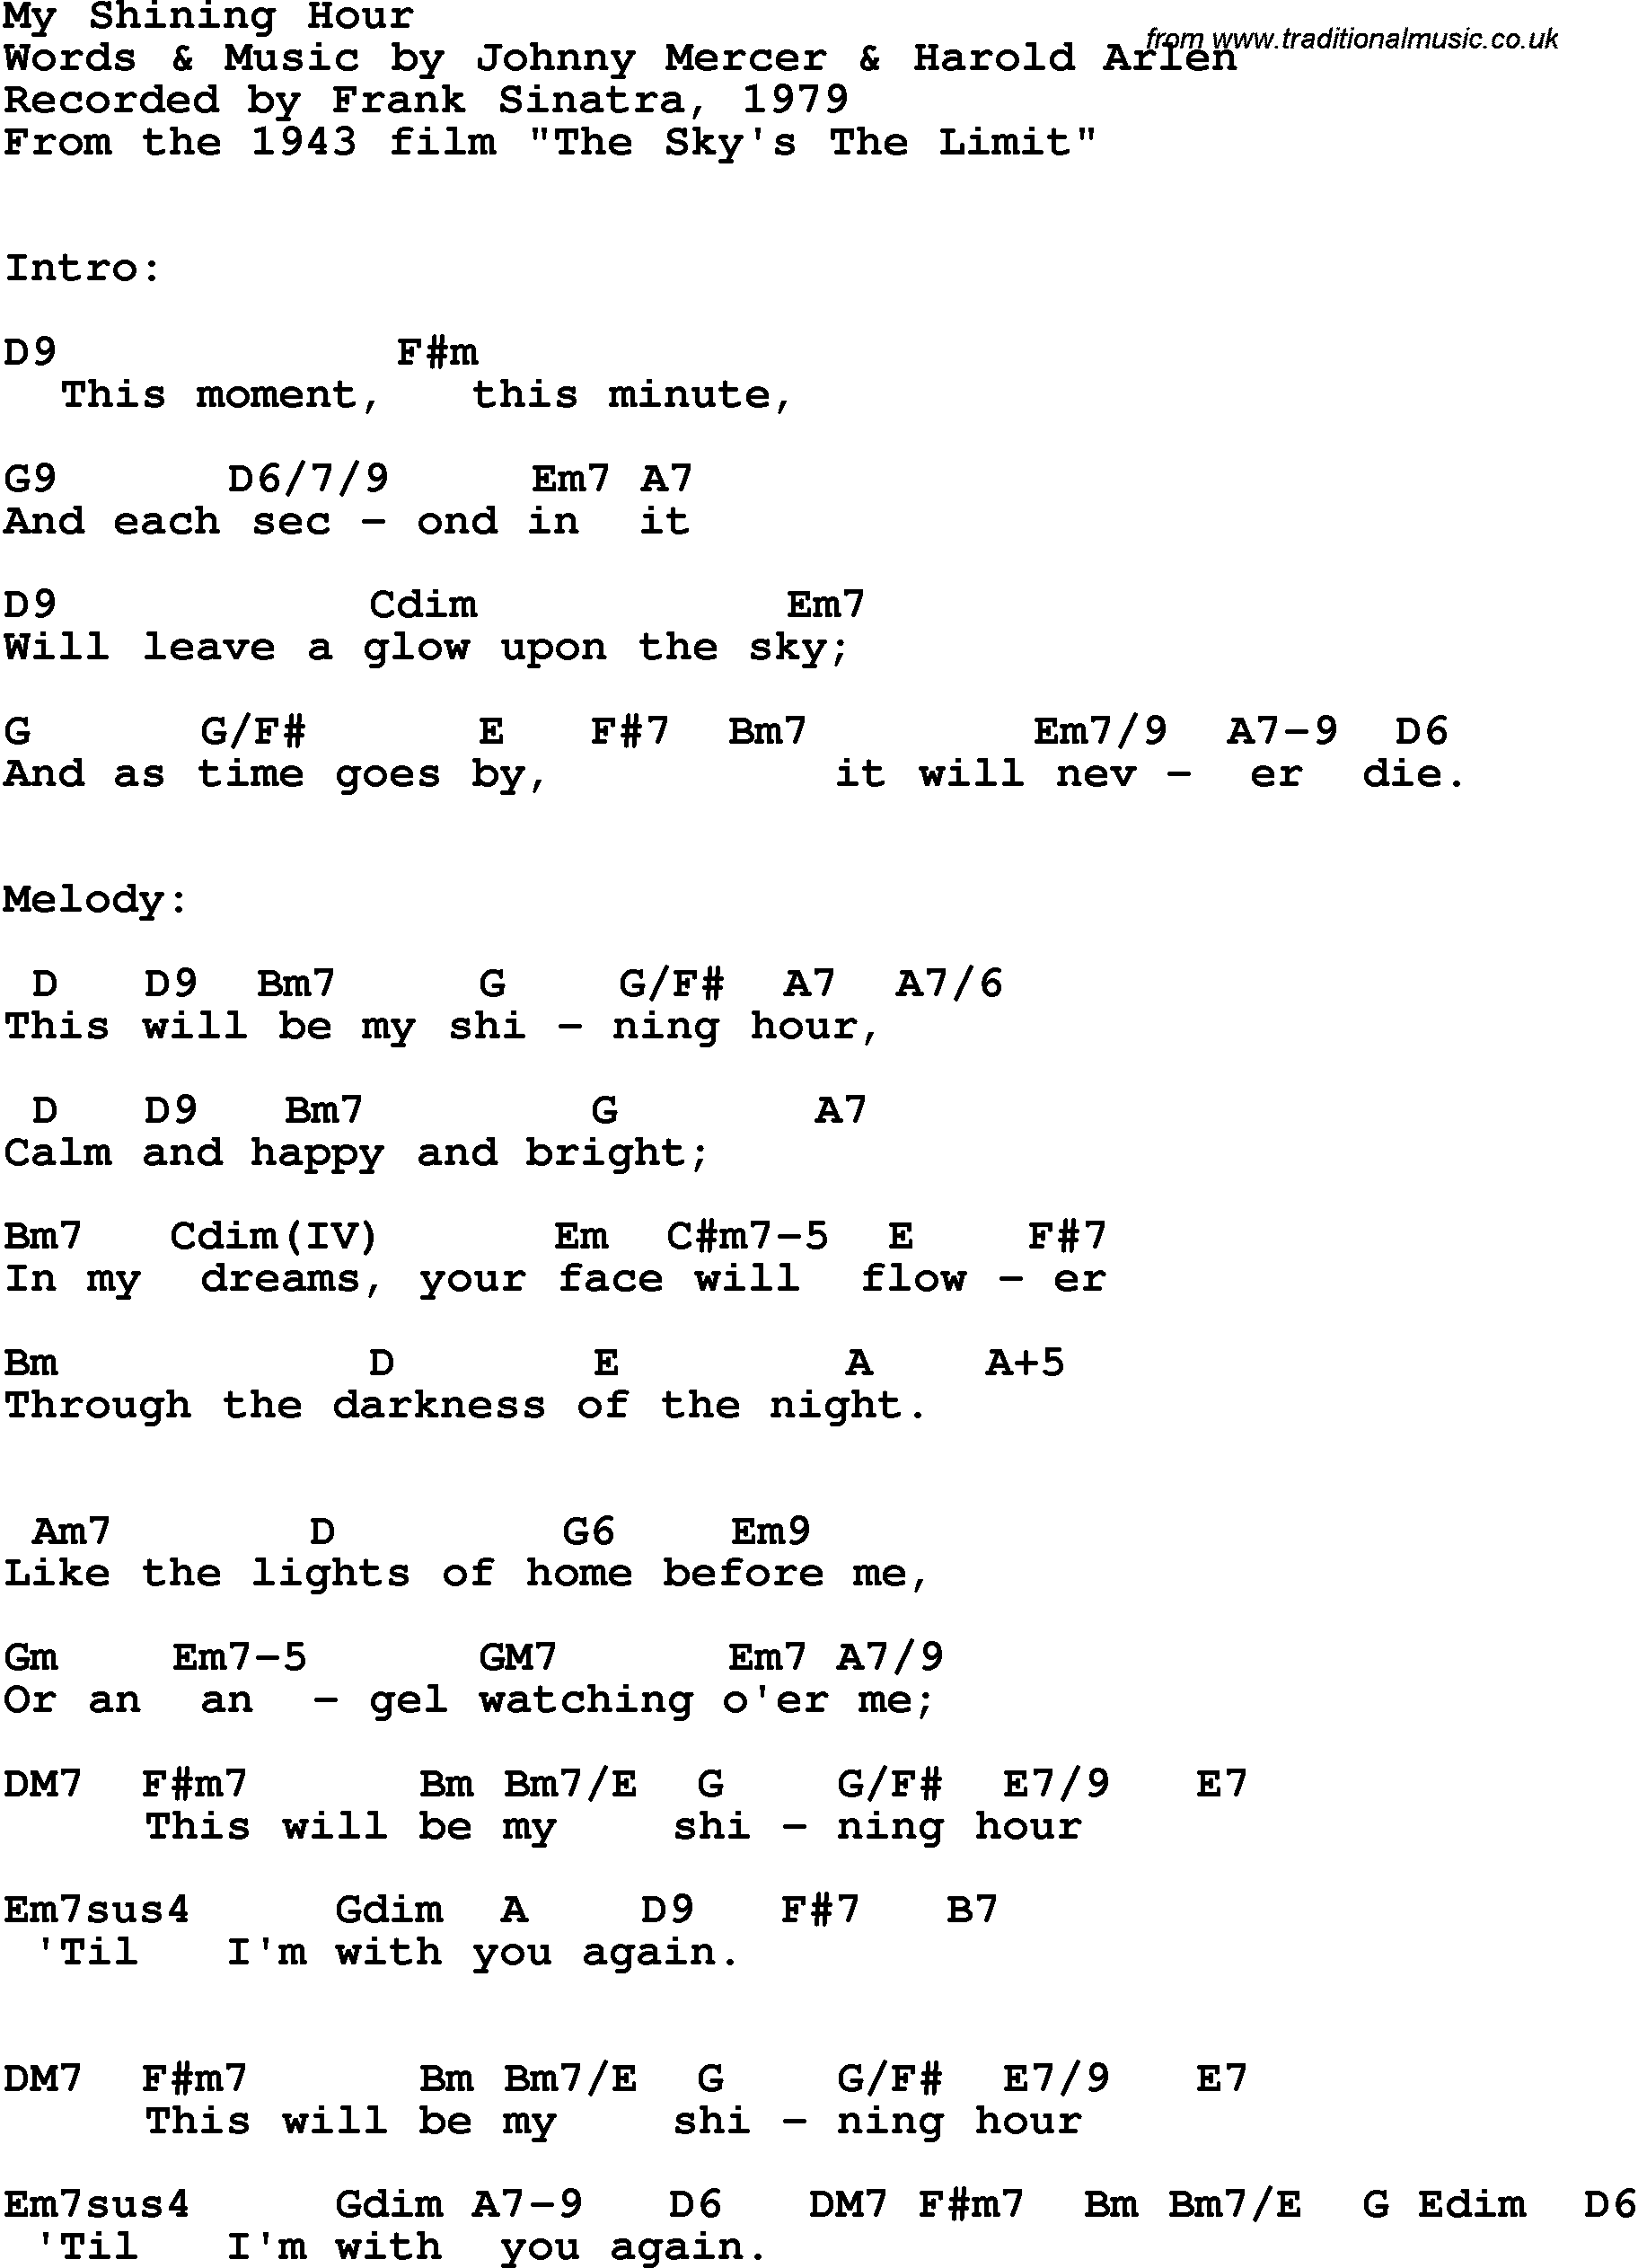 Song Lyrics with guitar chords for My Shining Hour - Frank Sinatra, 1979